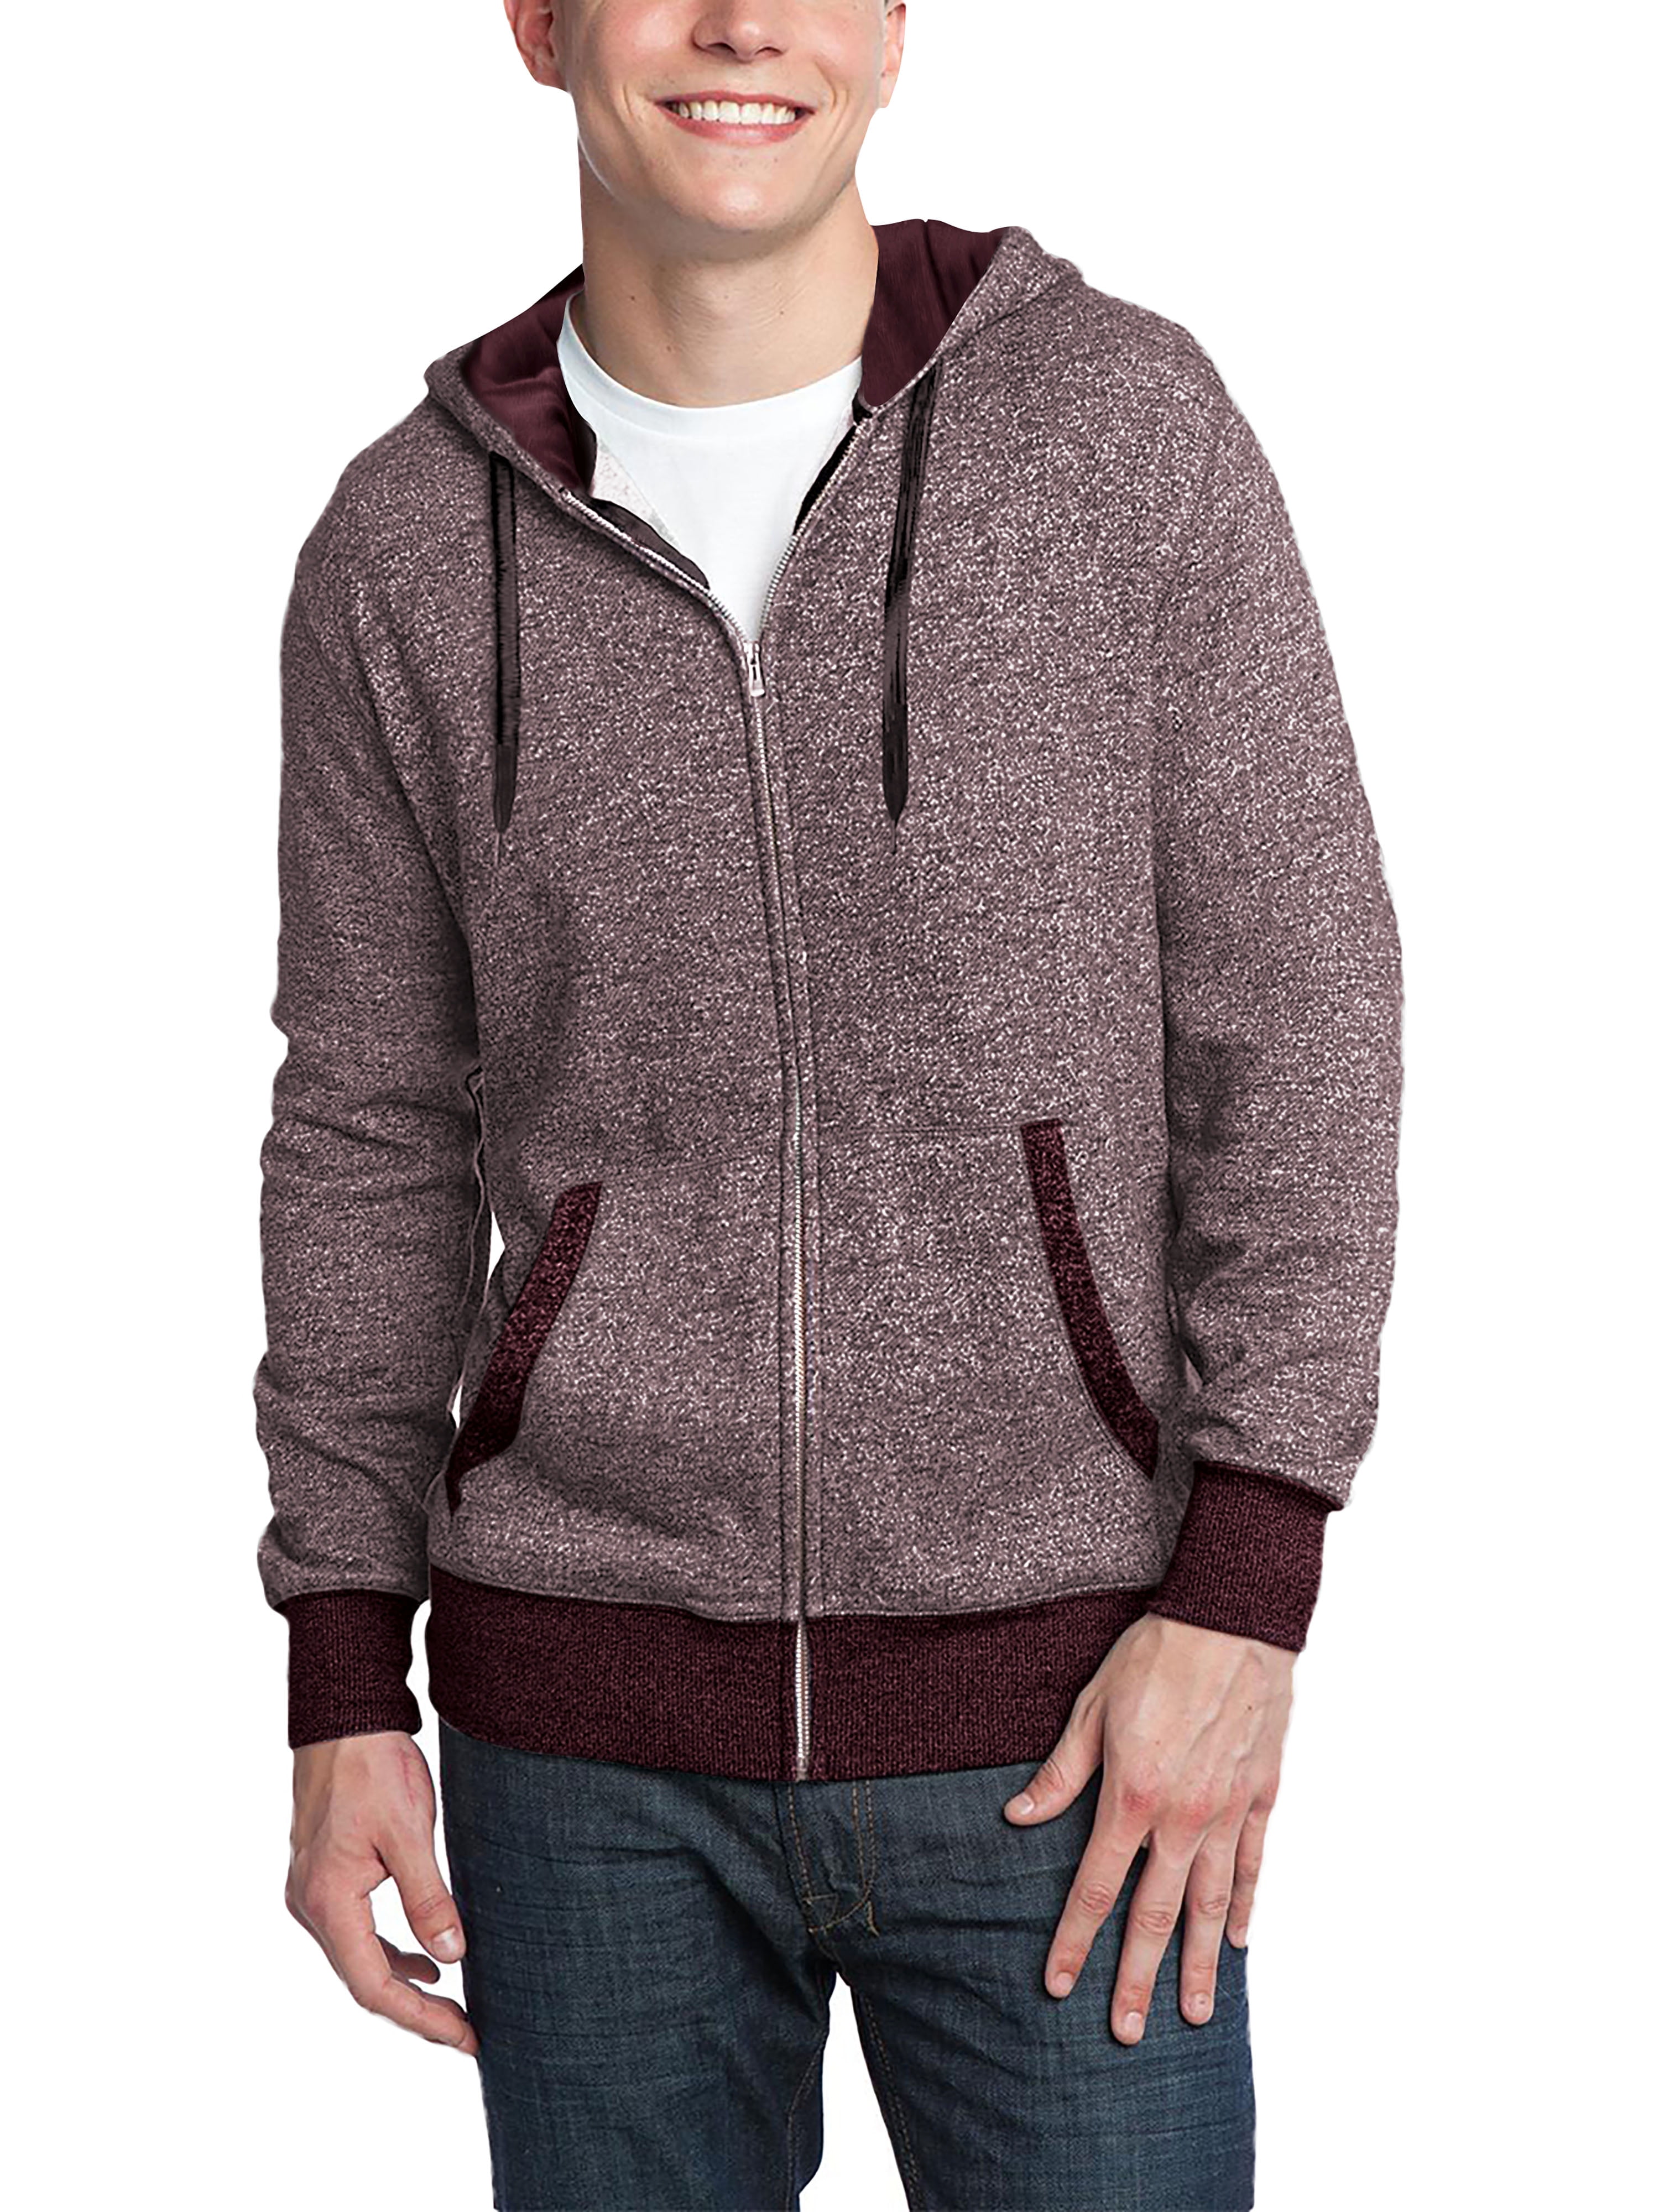 Hat and Beyond - Hat and Beyond Men's Basic Solid Marled Zip Up Hoodie ...